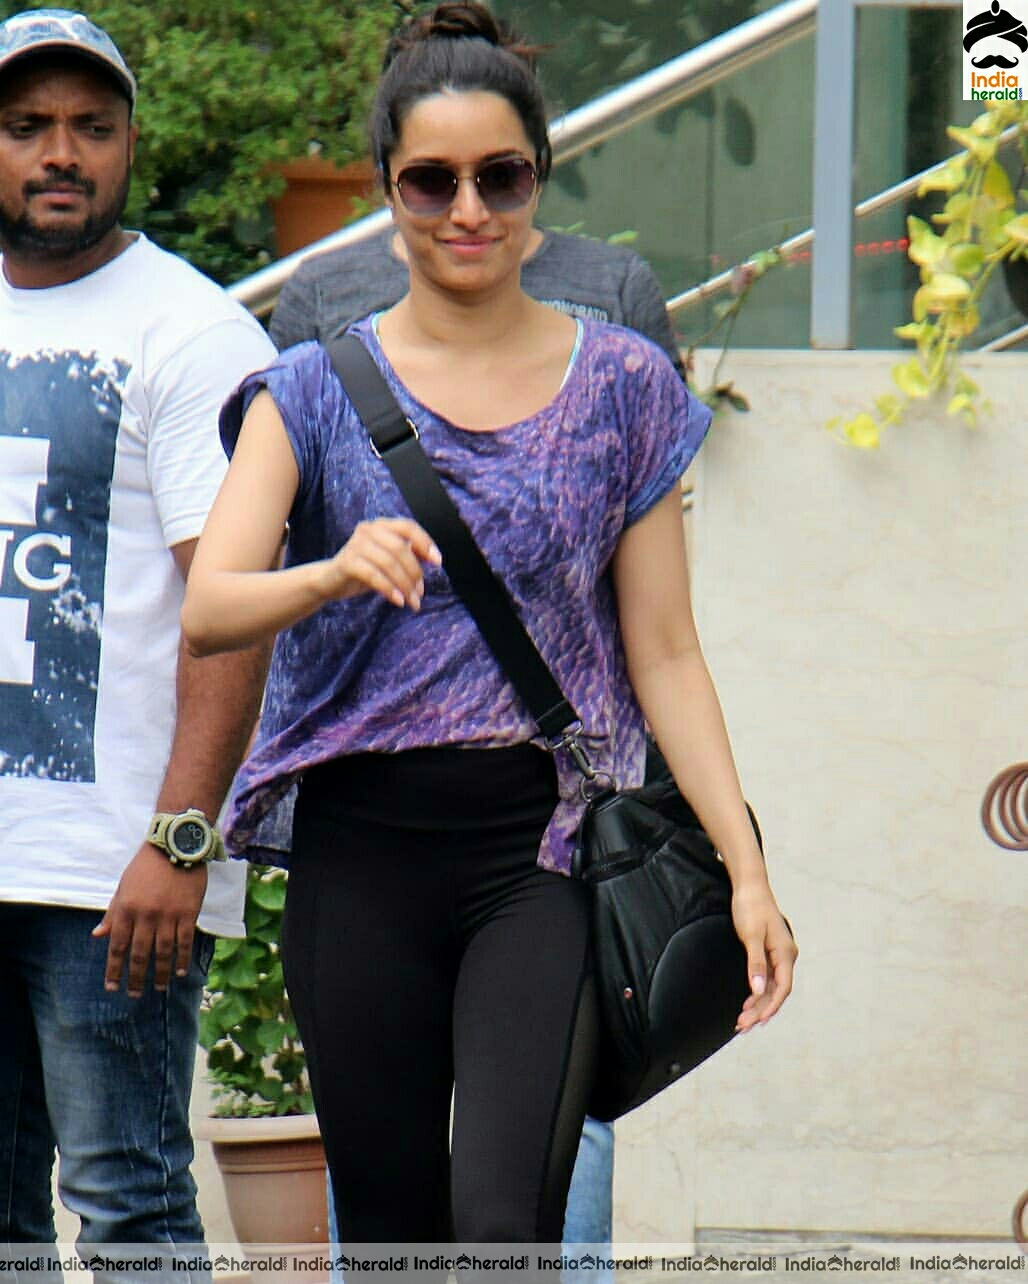 Shraddha Seen in lose top and shades